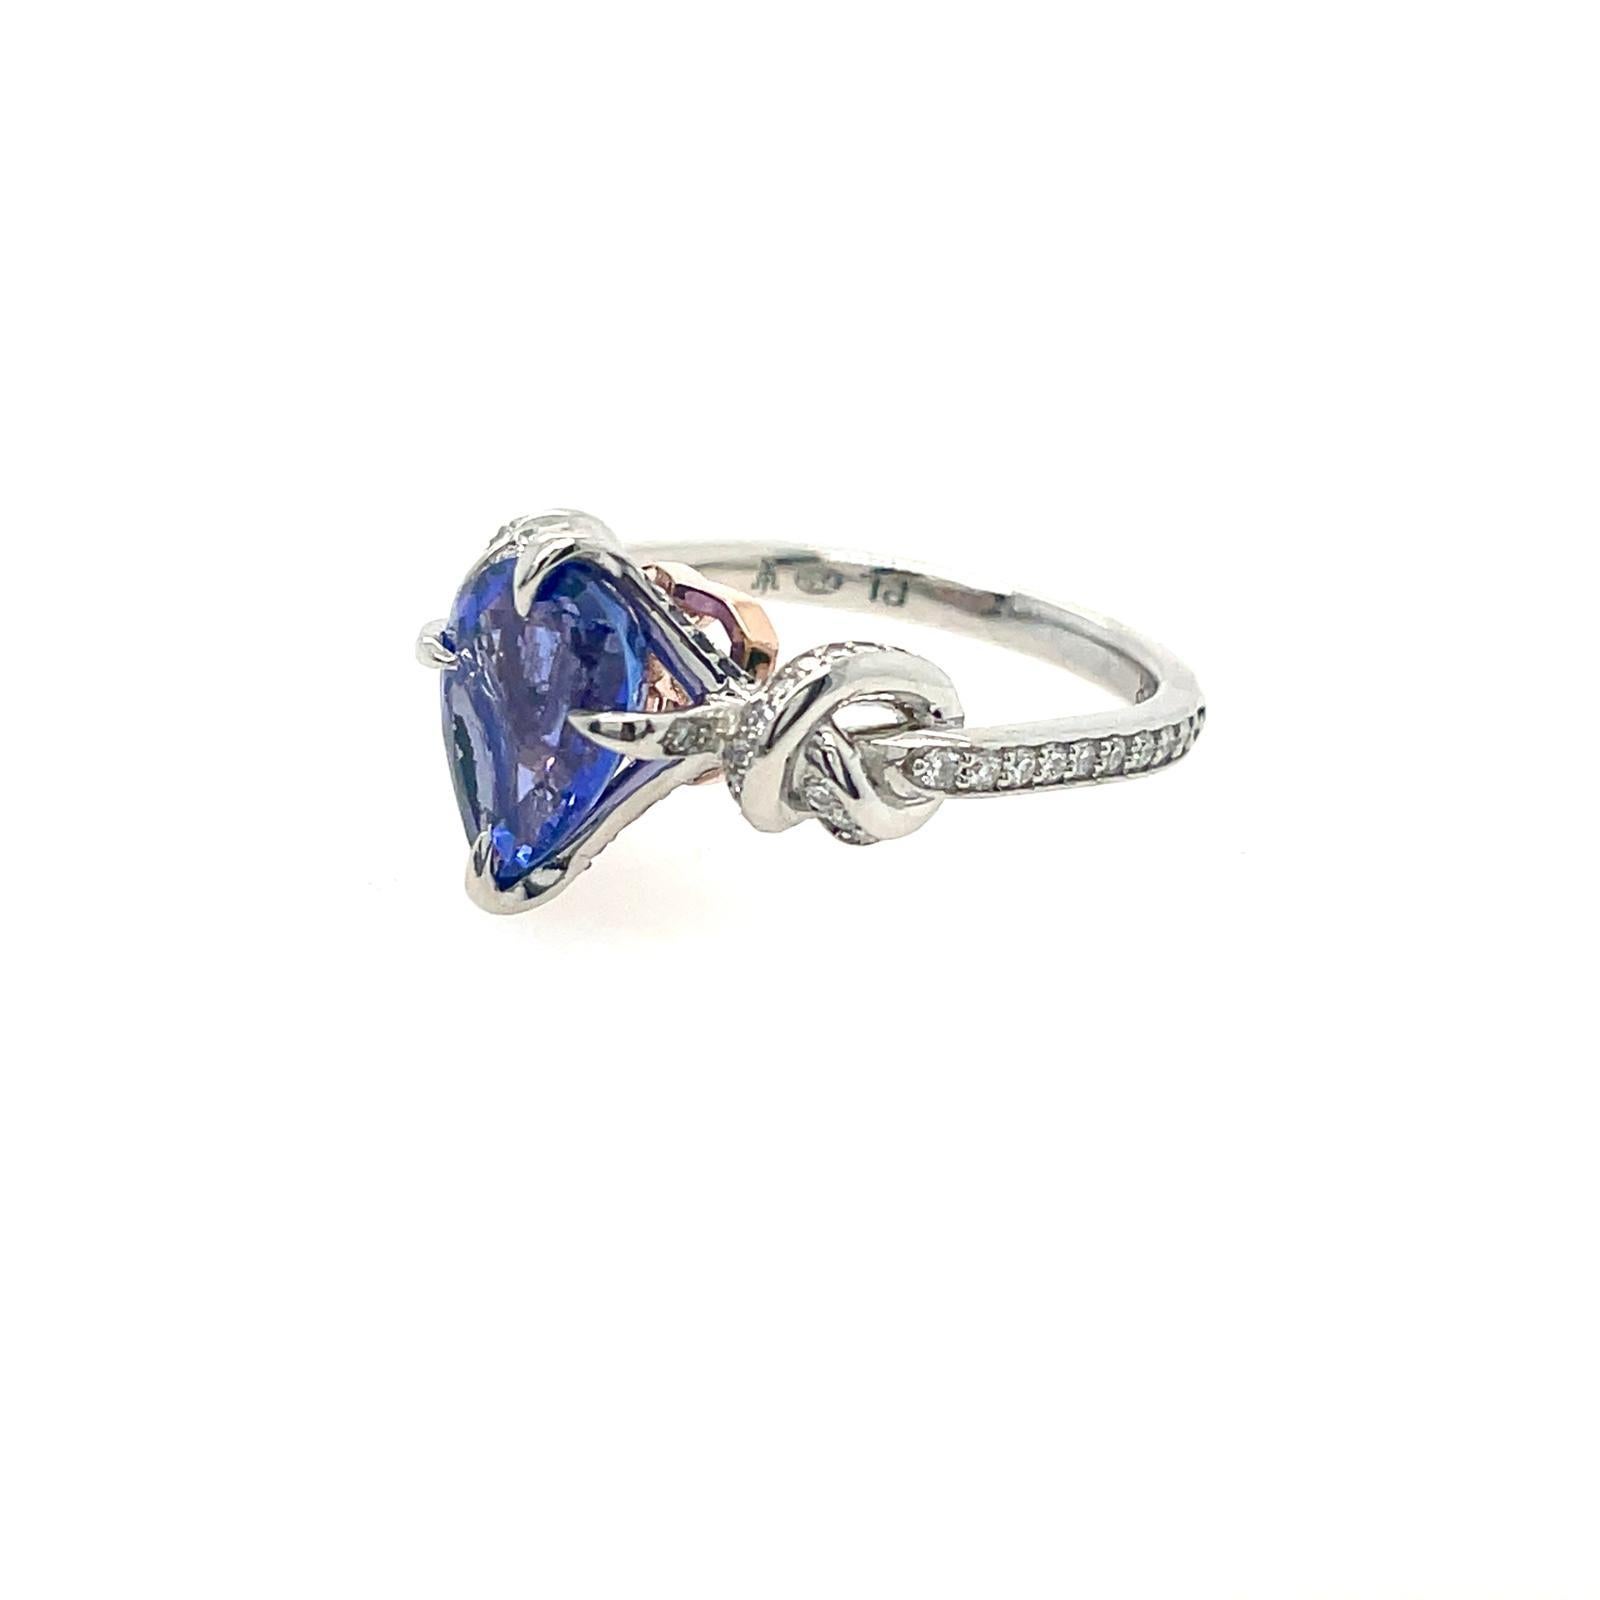 For Sale:  2ct tanzanite and diamond ring in platinum and rose gold  Forget me knot ring  4